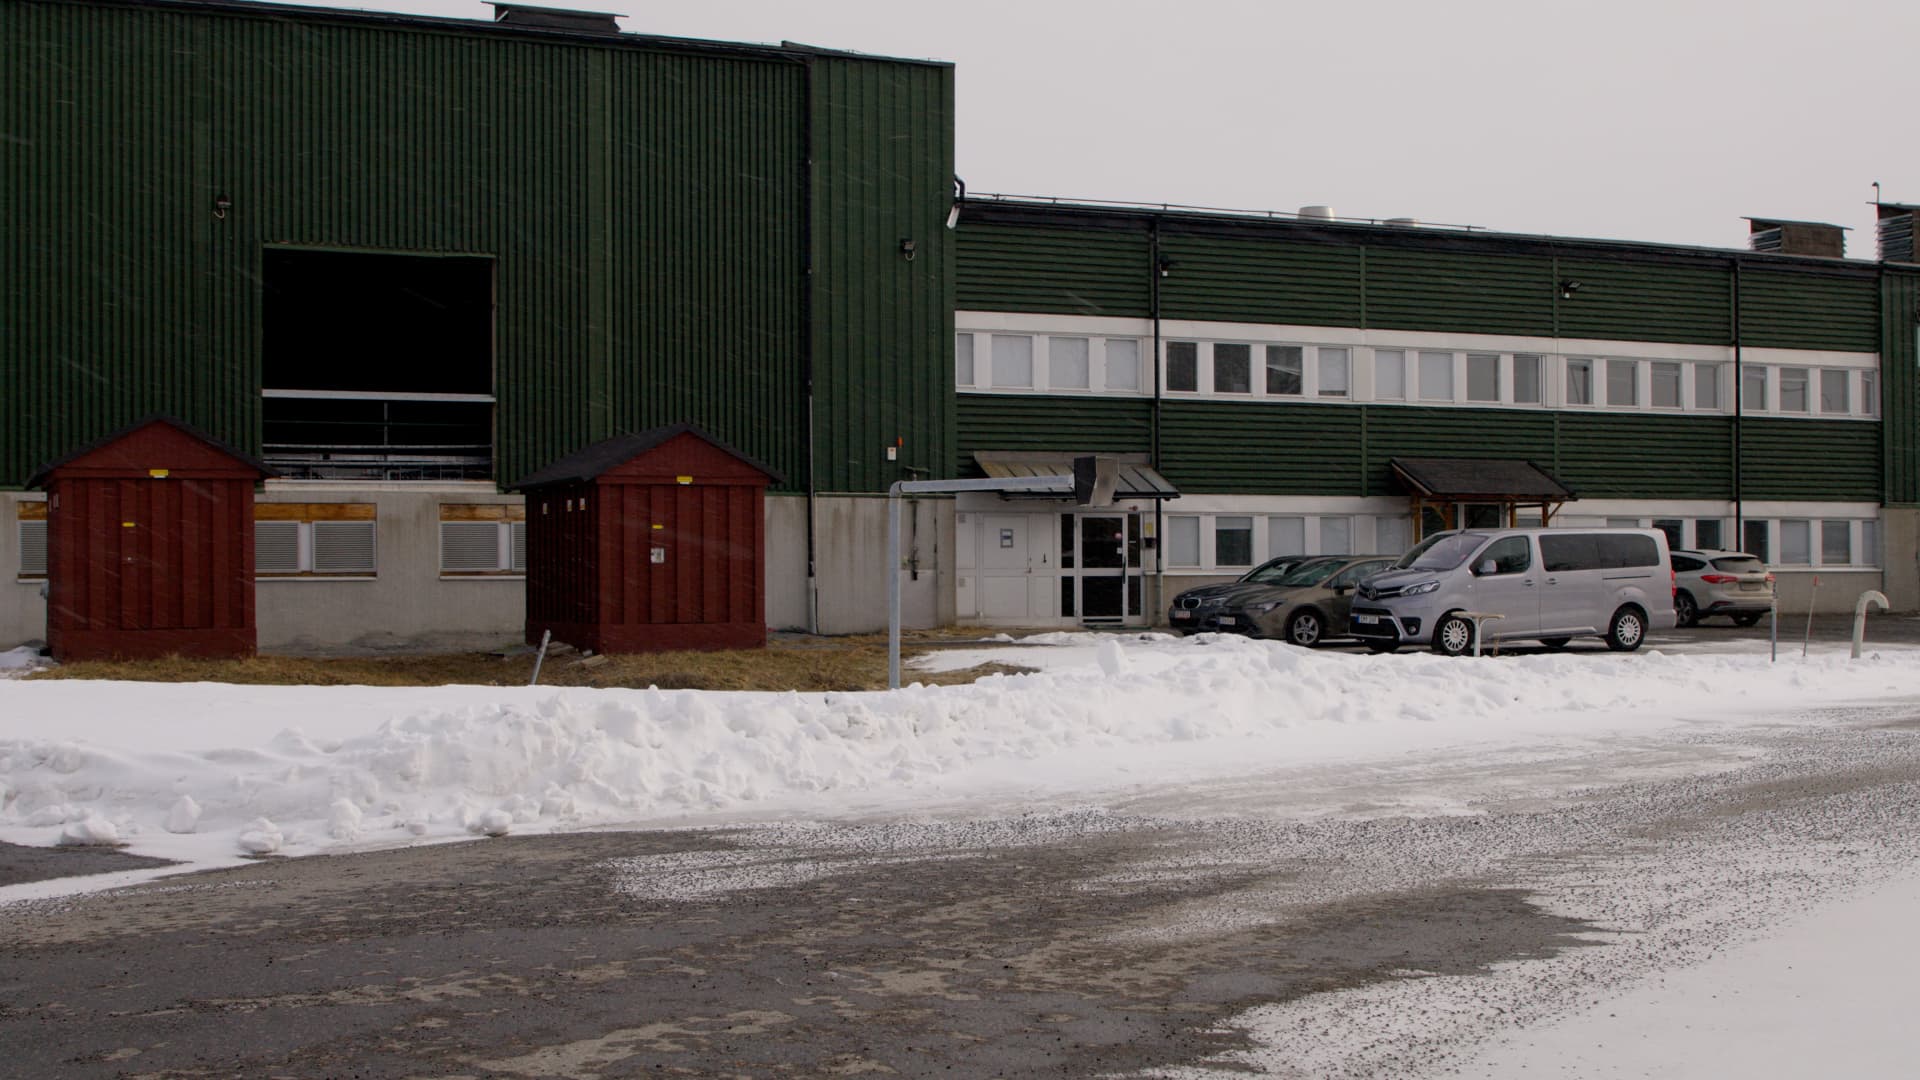 At 86,000 square feet, Hive's Swedish mining facility is bigger than a standard soccer pitch.